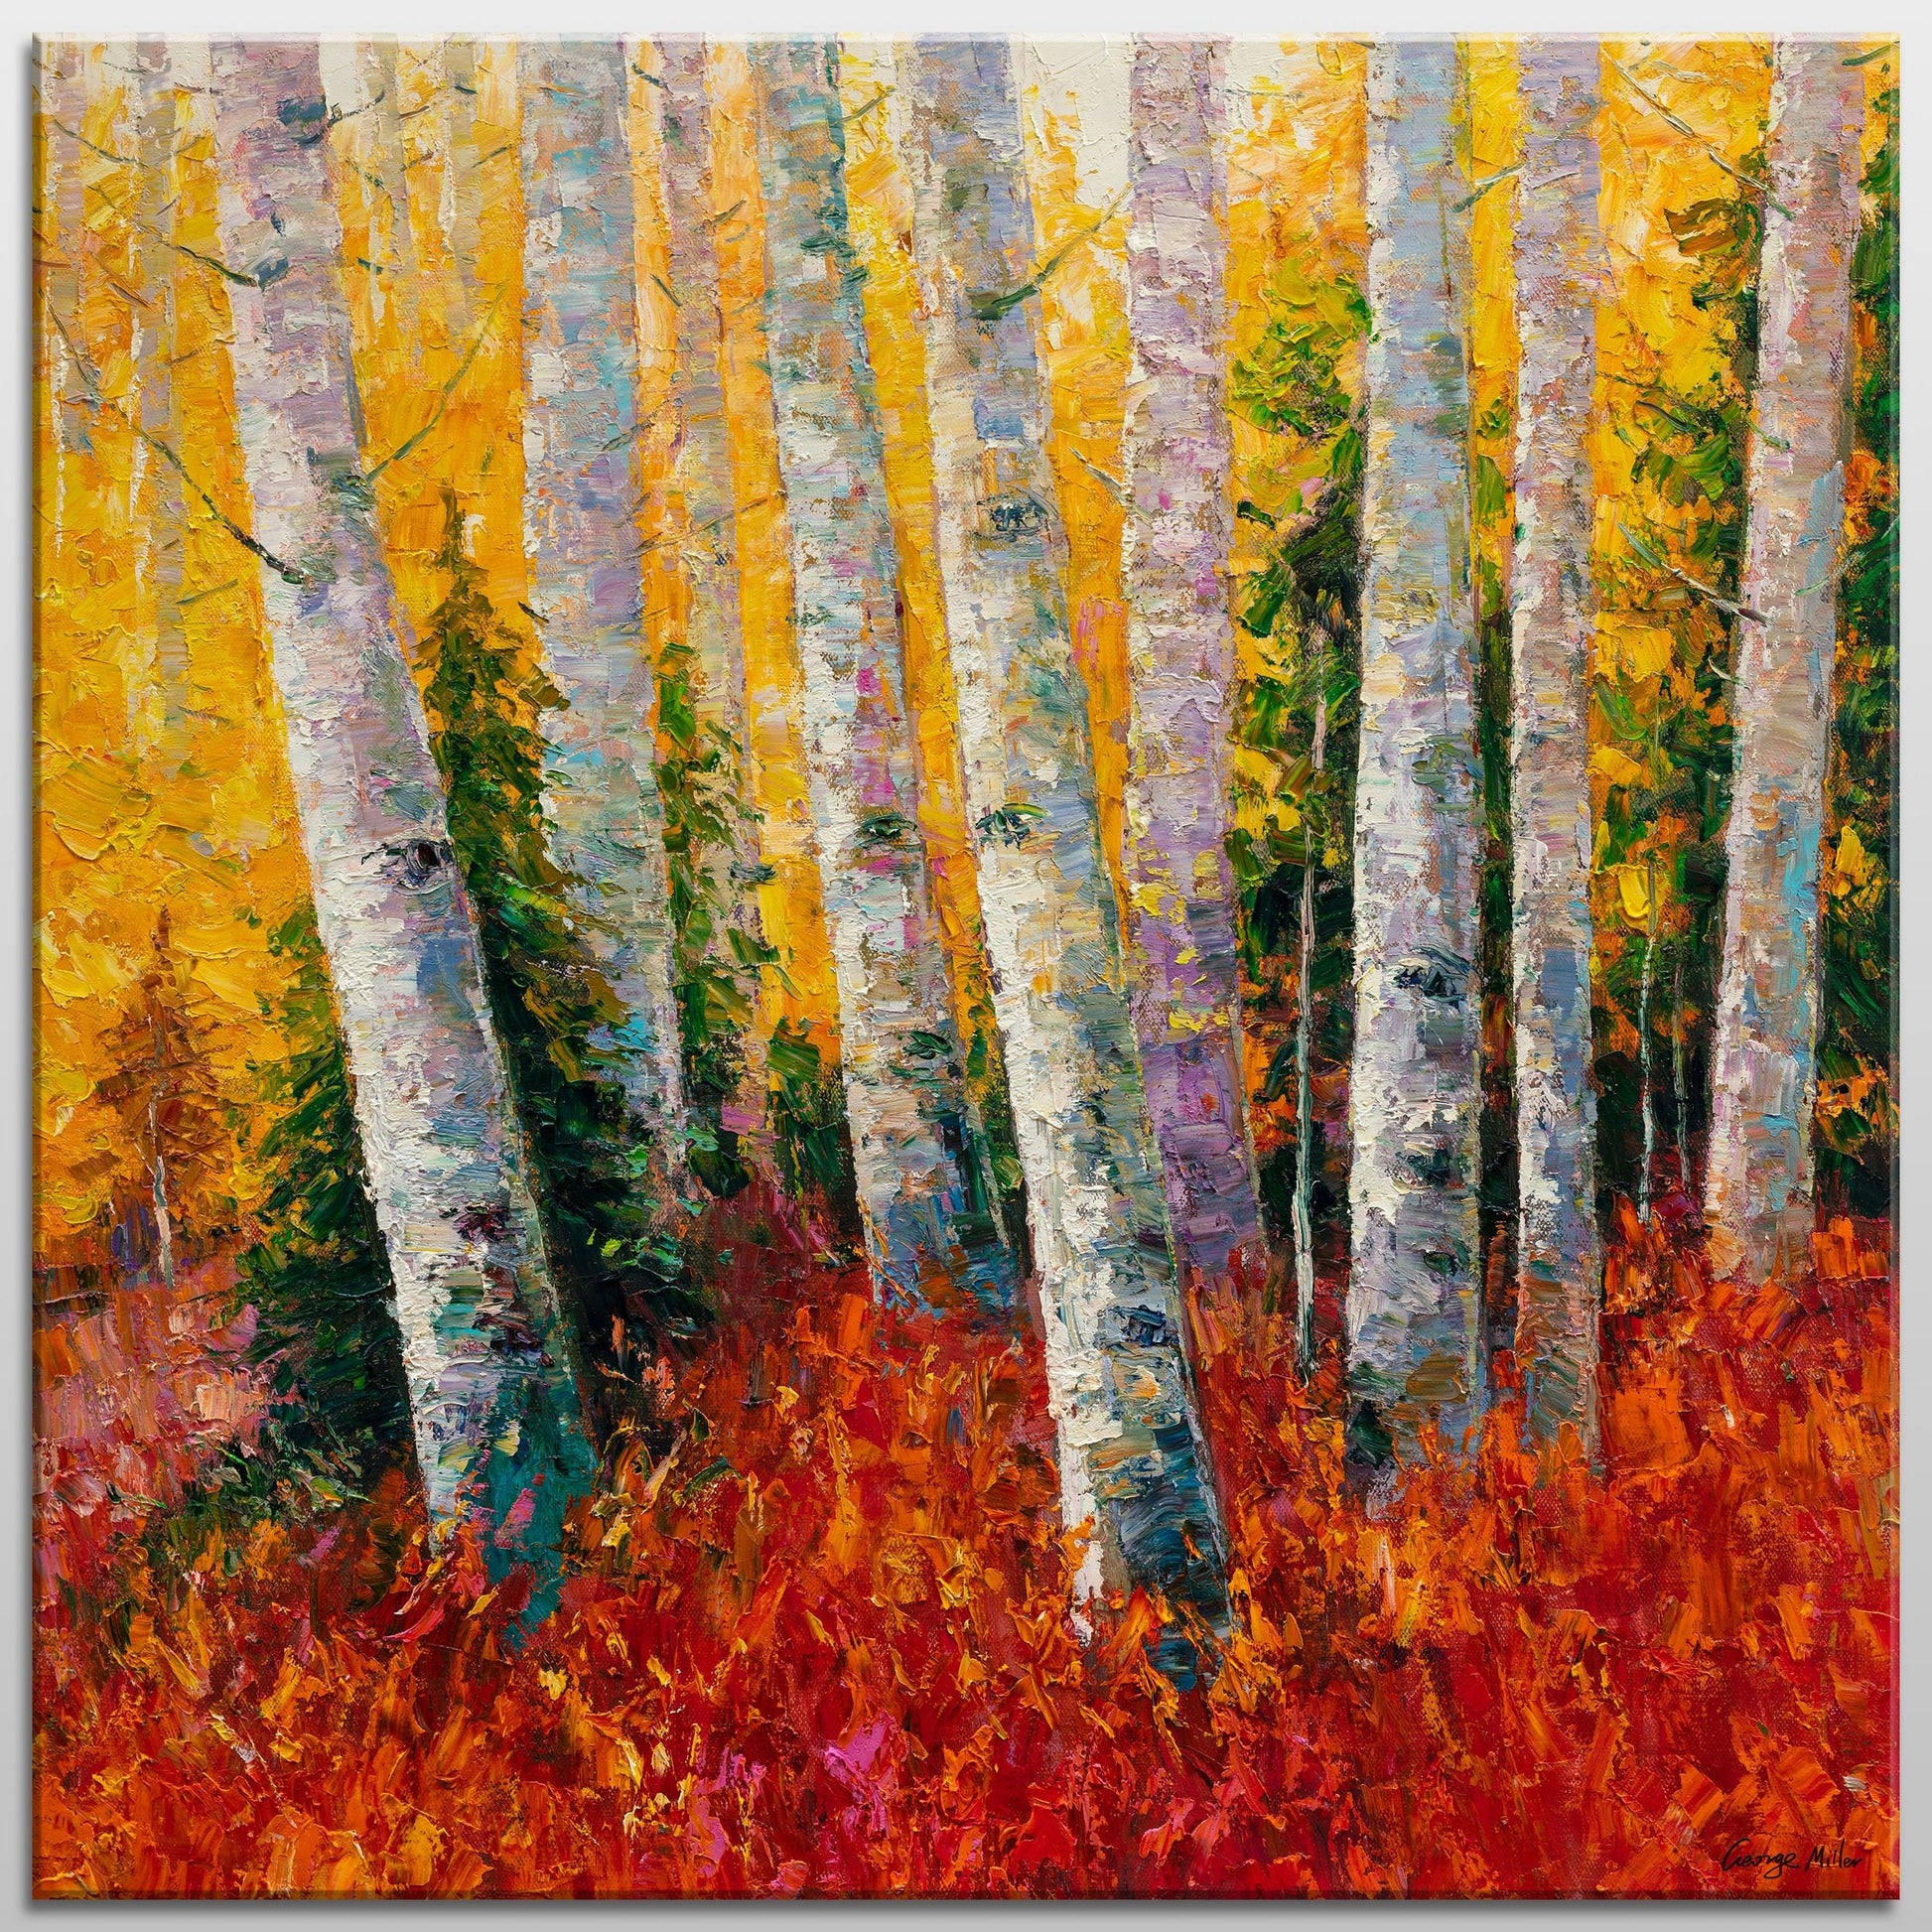 Oil Painting White Birch Trees Autumn, Landscape Wall Art, Large Canvas Art, Rustic Oil Painting, Textured Painting, Original Artwork